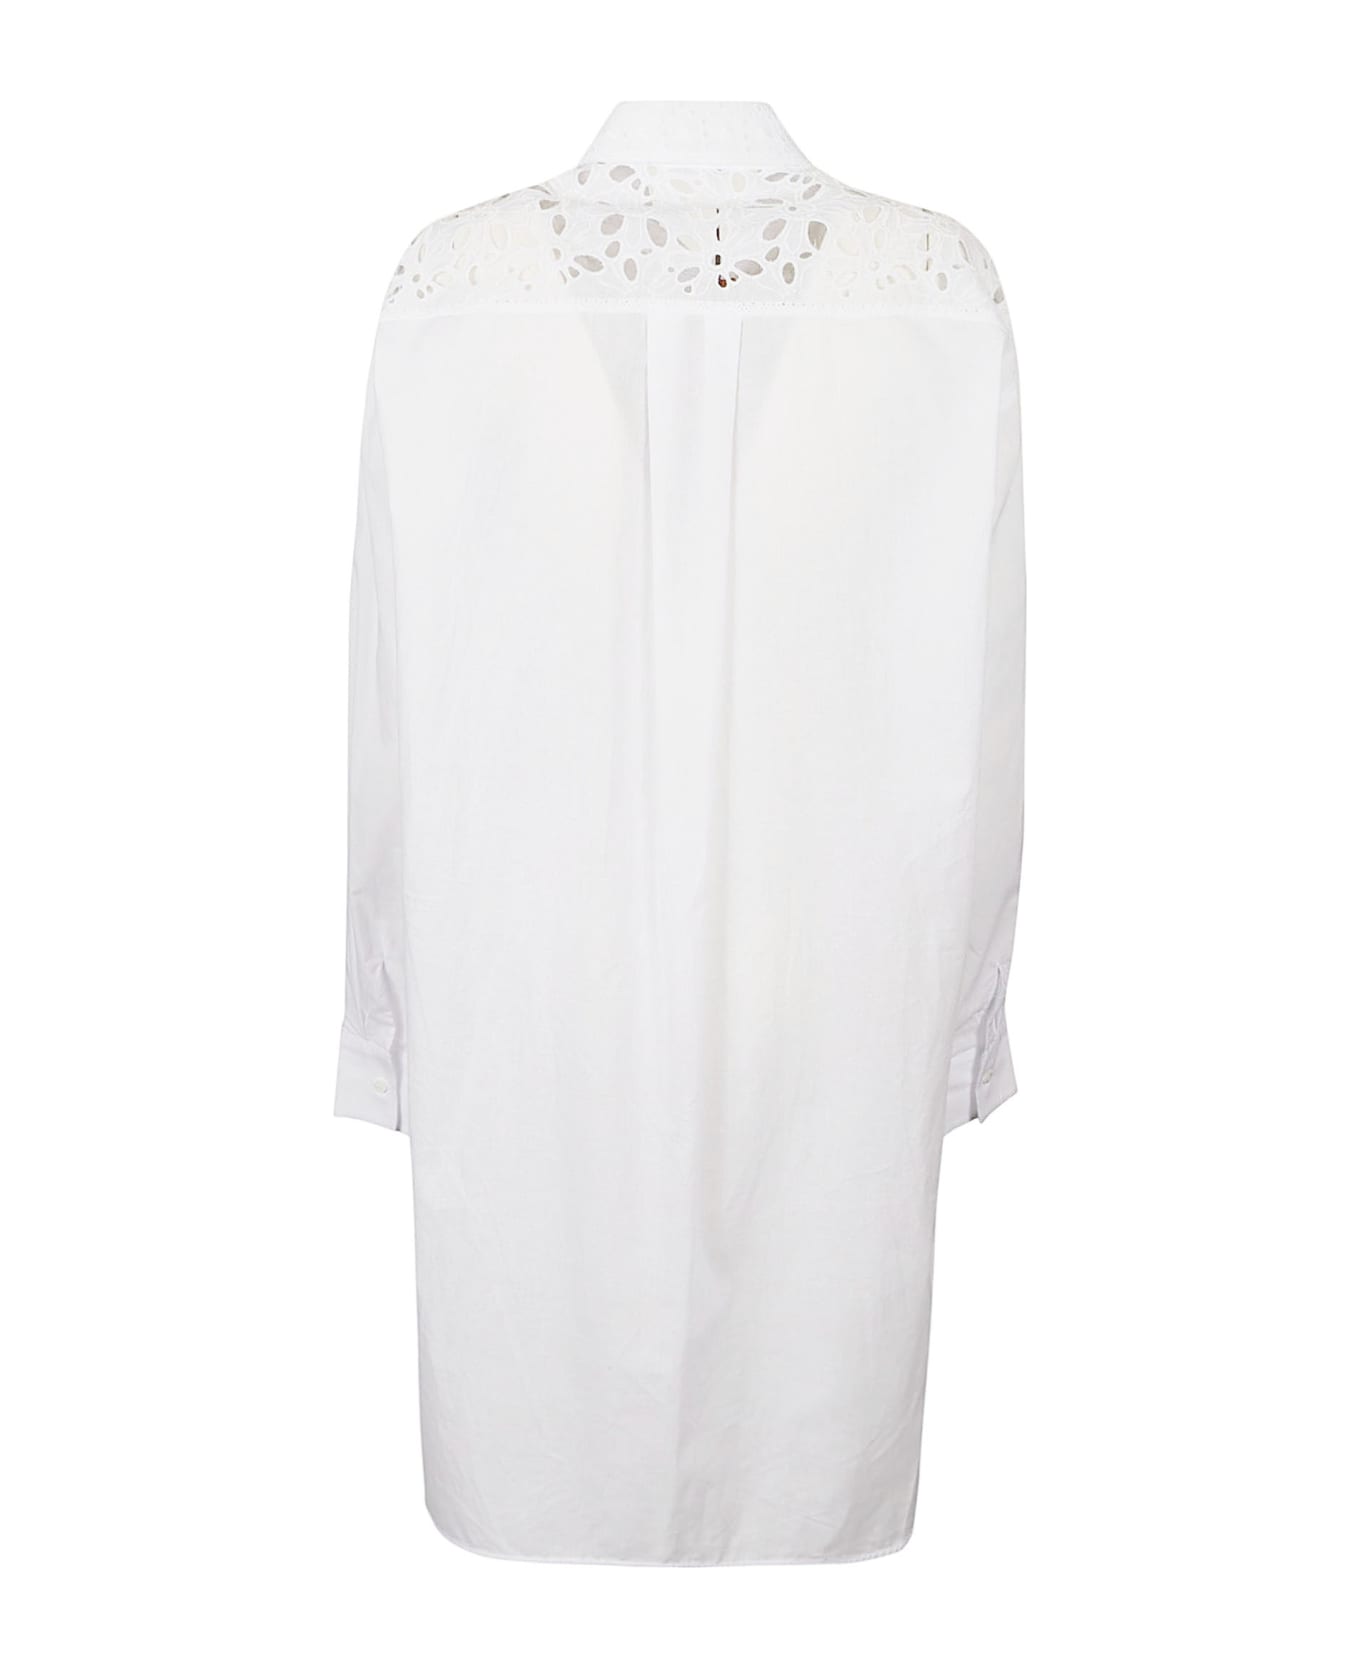 Ermanno Scervino Floral Perforated Oversized Shirt - Bright White